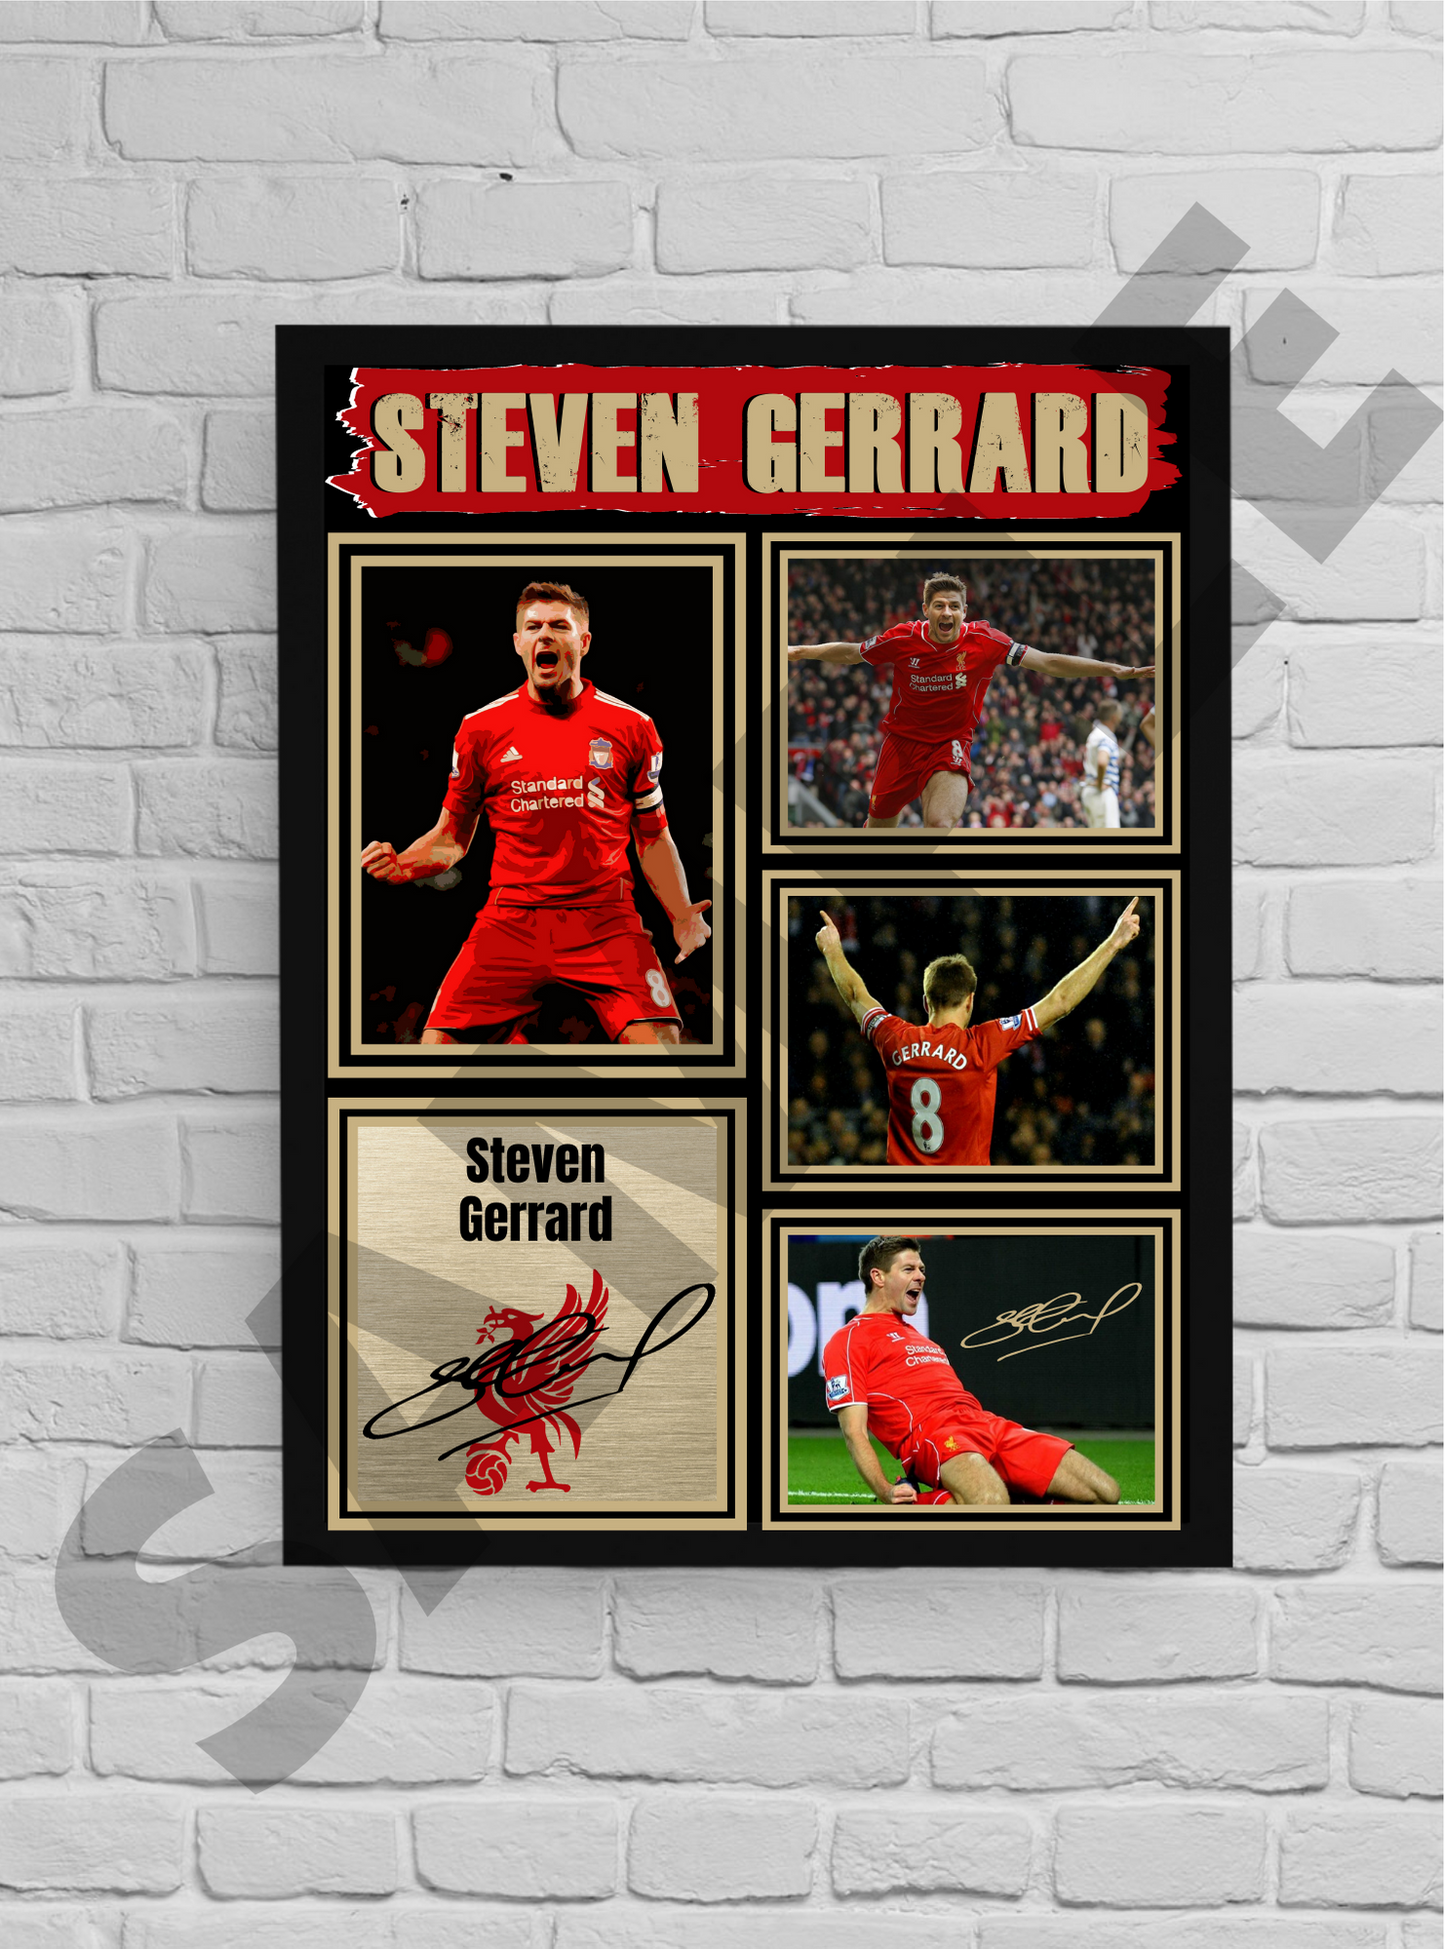 Stevie G (Liverpool) #30 - Football Collectible/Memorabilia/Print signed